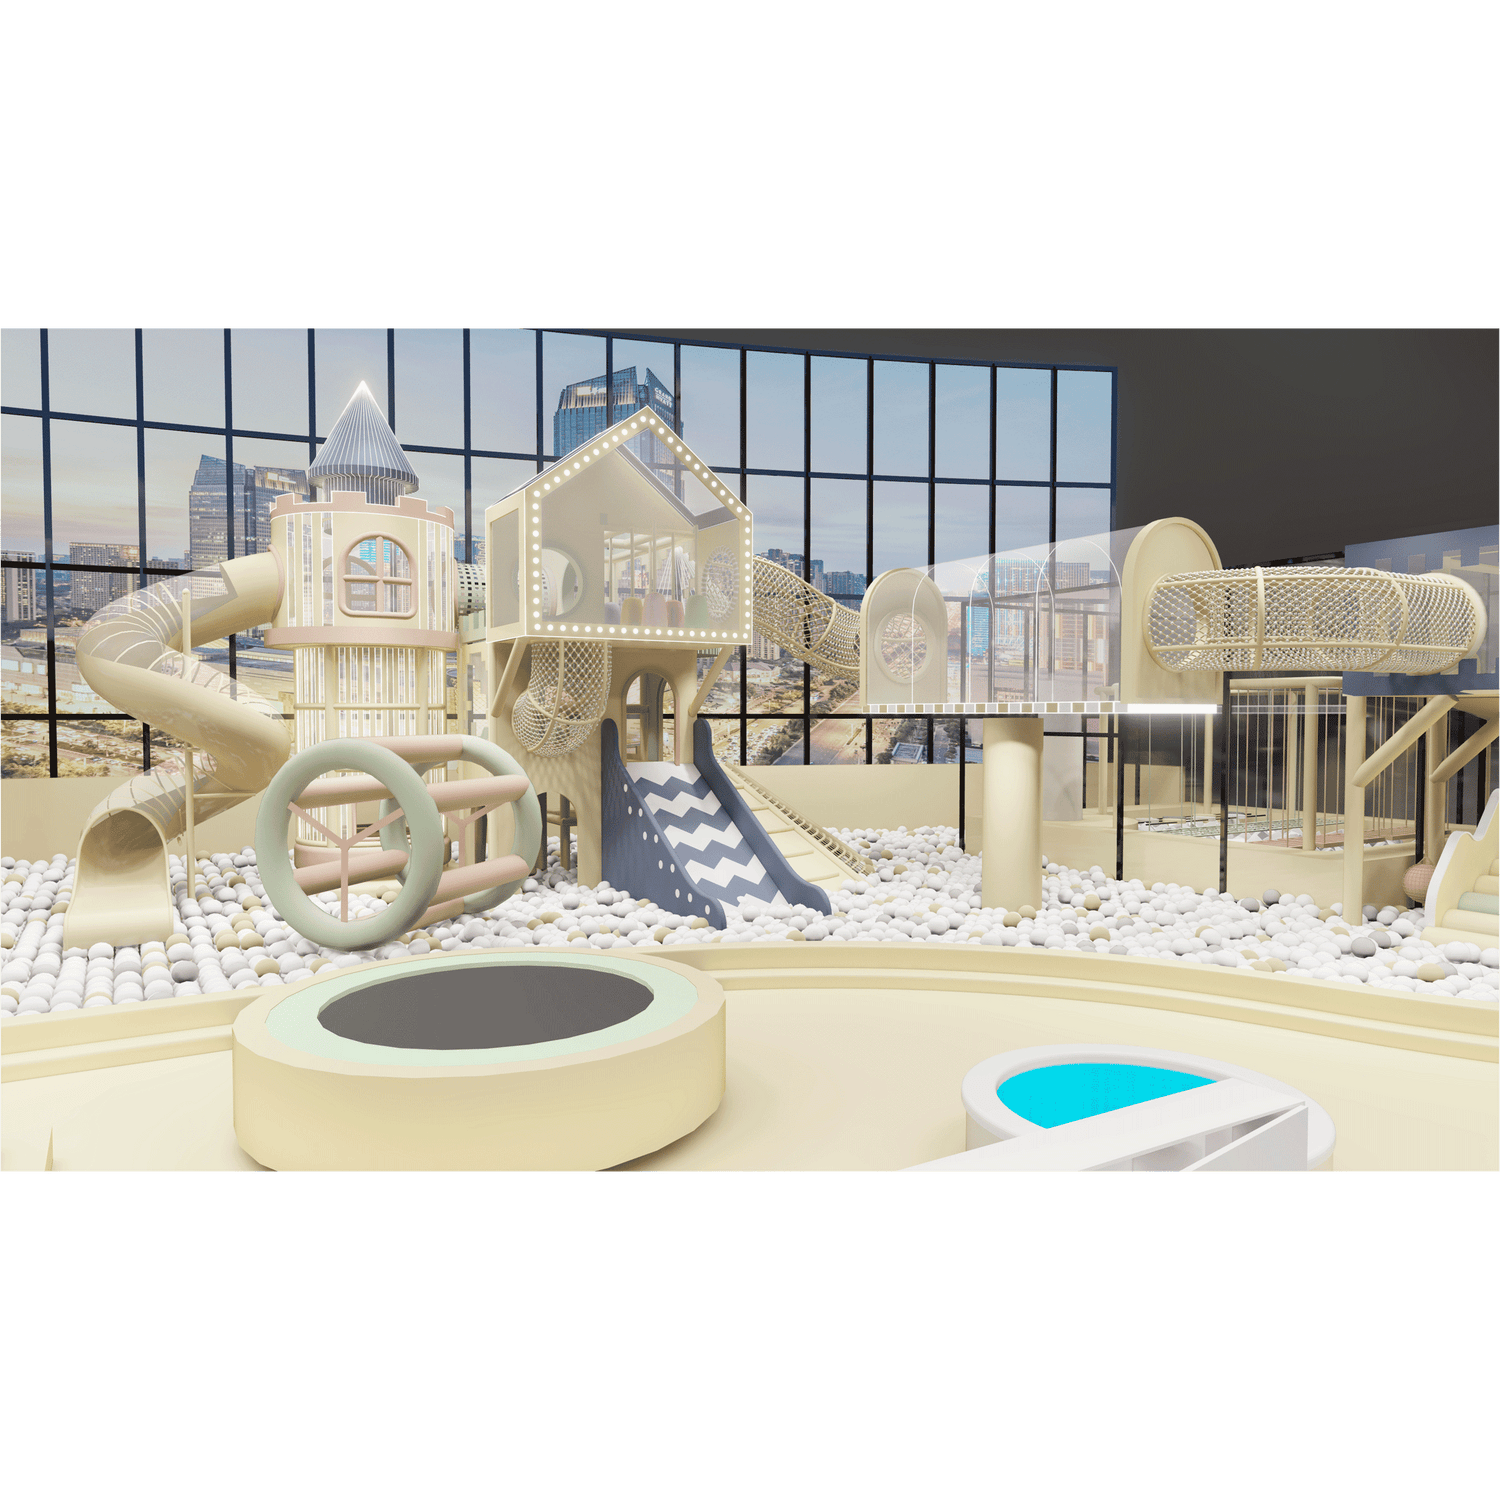 NinescapeLand provide the free installation for indoor playground